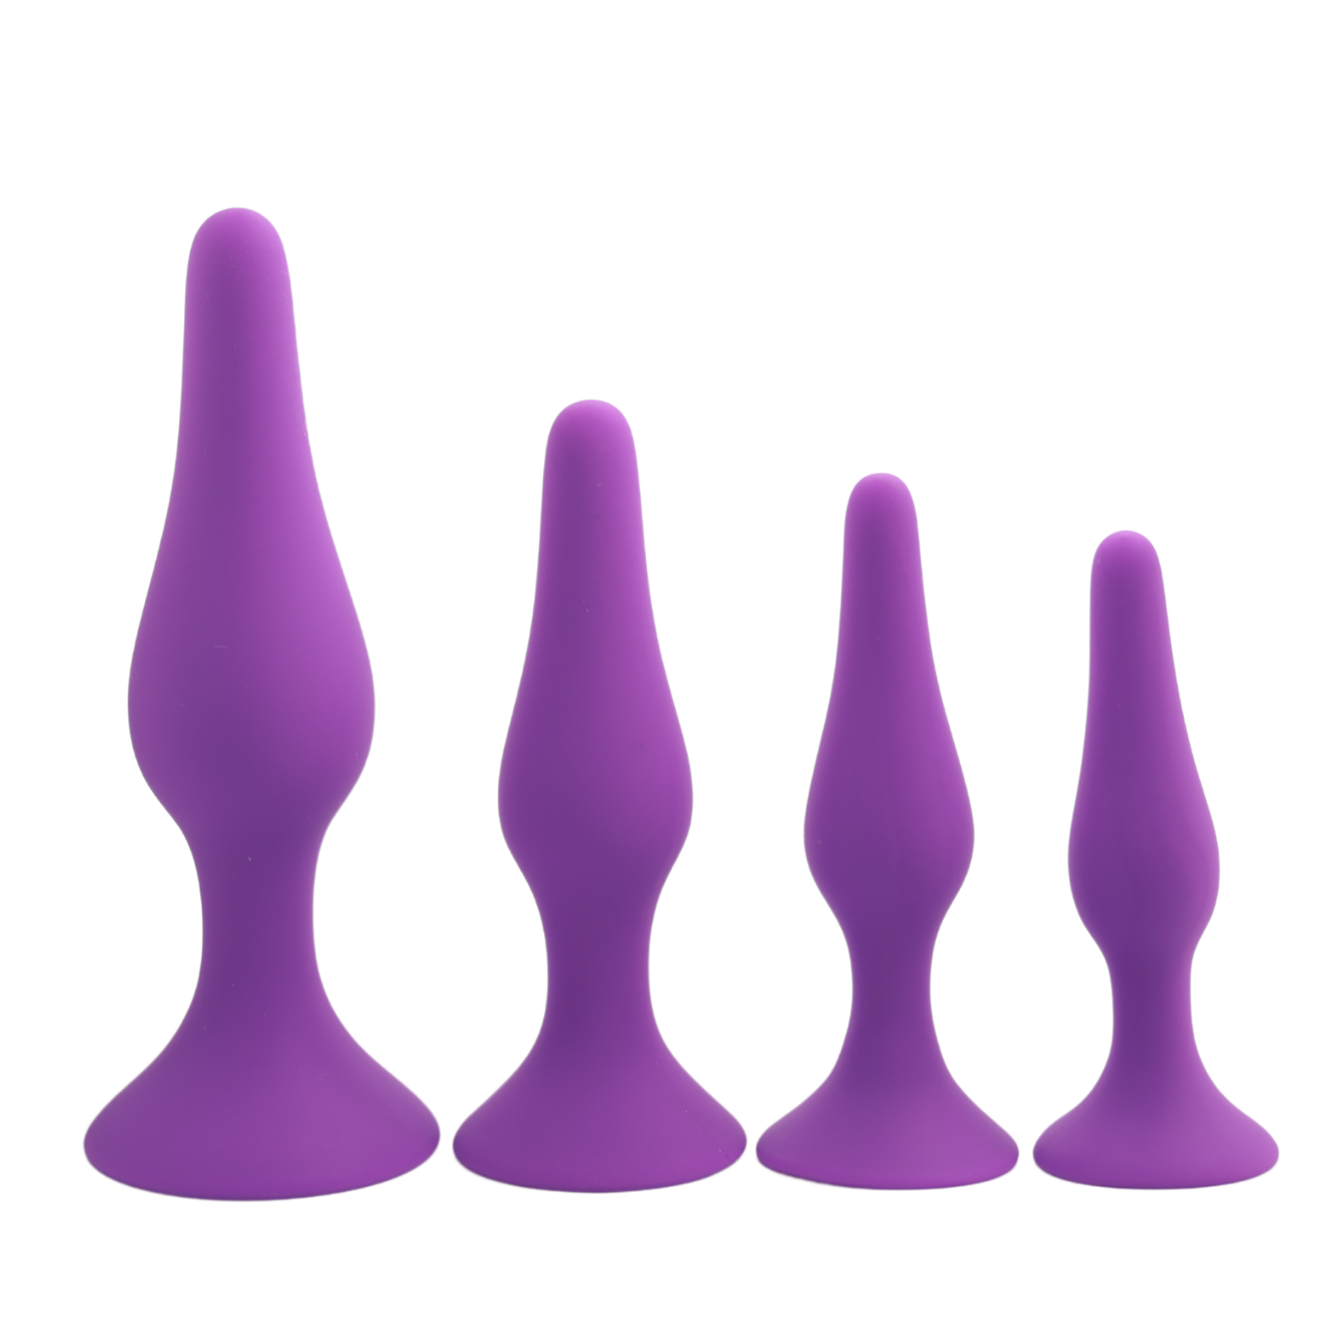 Image of various sizes of purple silicone anal plug